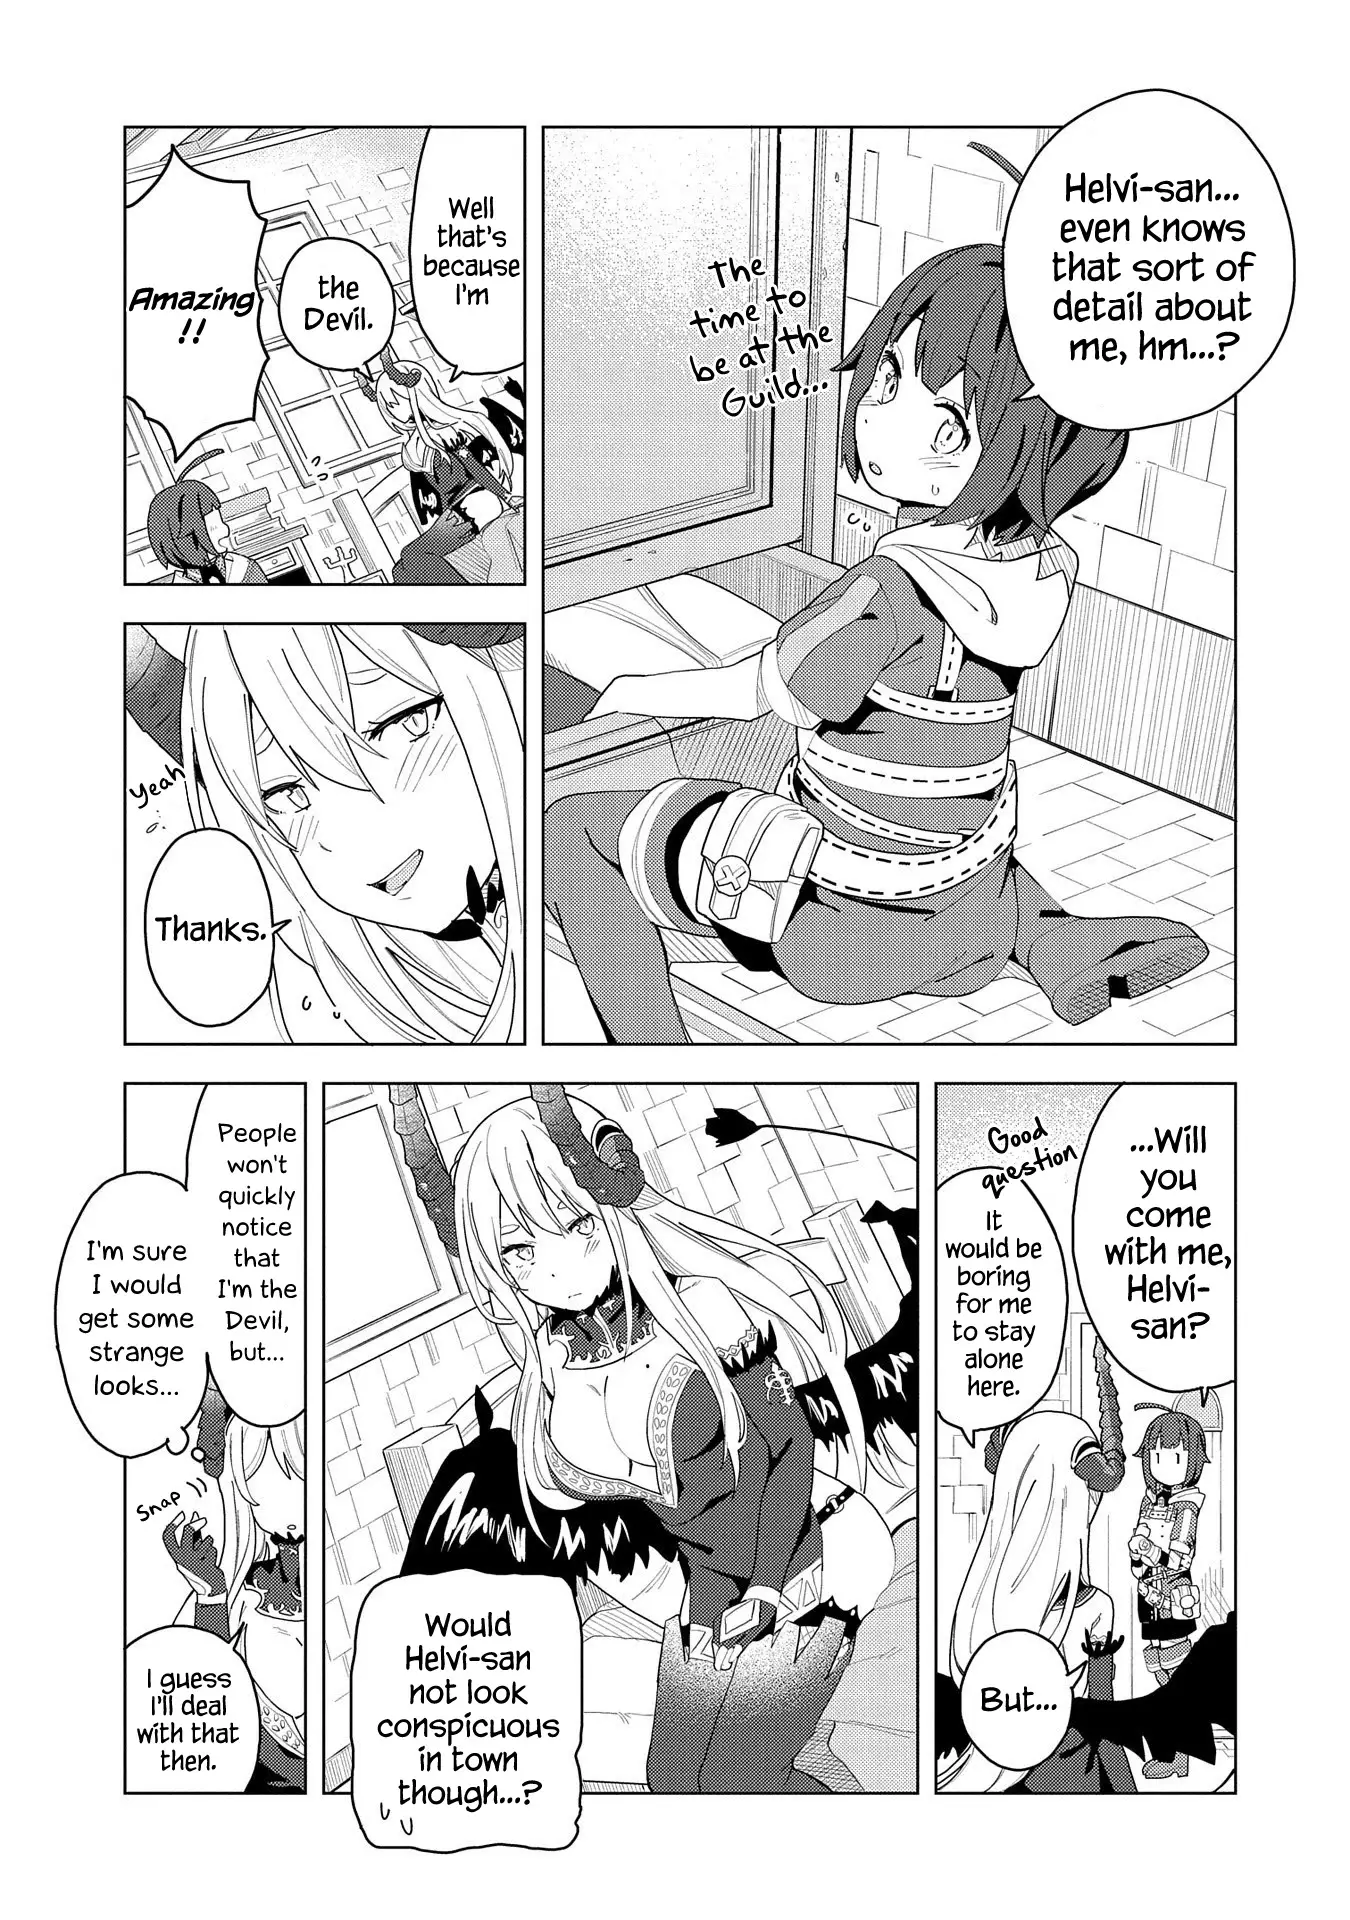 I Summoned The Devil To Grant Me A Wish, But I Married Her Instead Since She Was Adorable ~My New Devil Wife~ - 2 page 19